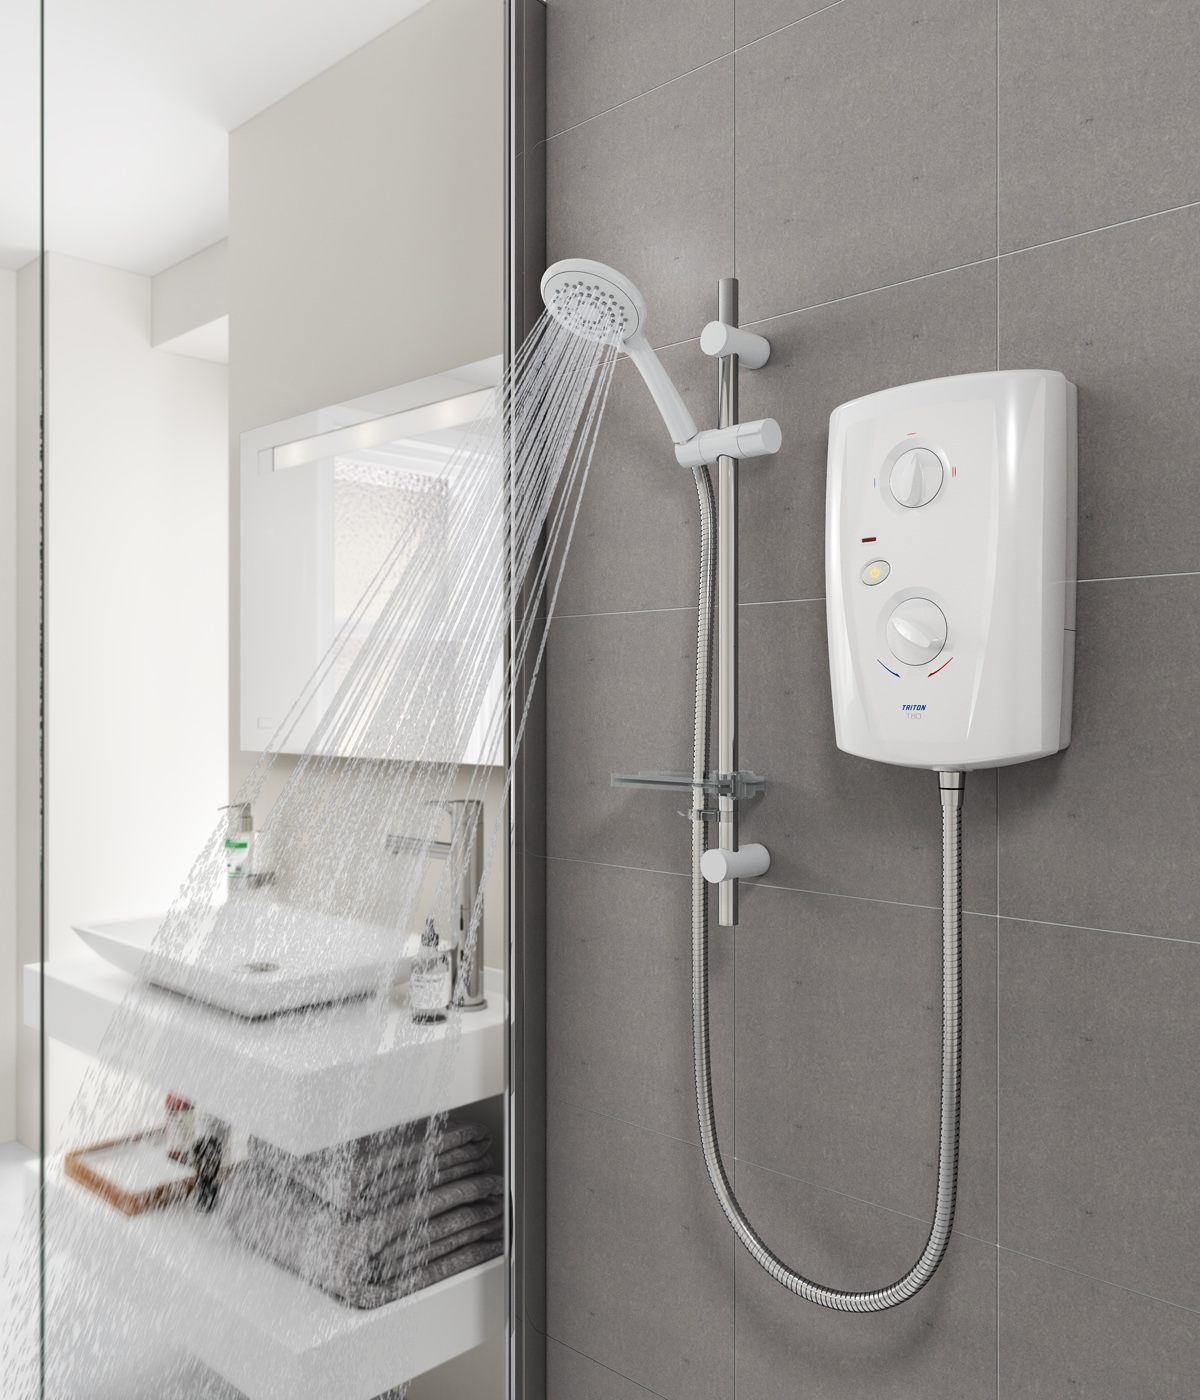 Triton | Easing the pressure for housing associations and tenants with efficient shower solutions